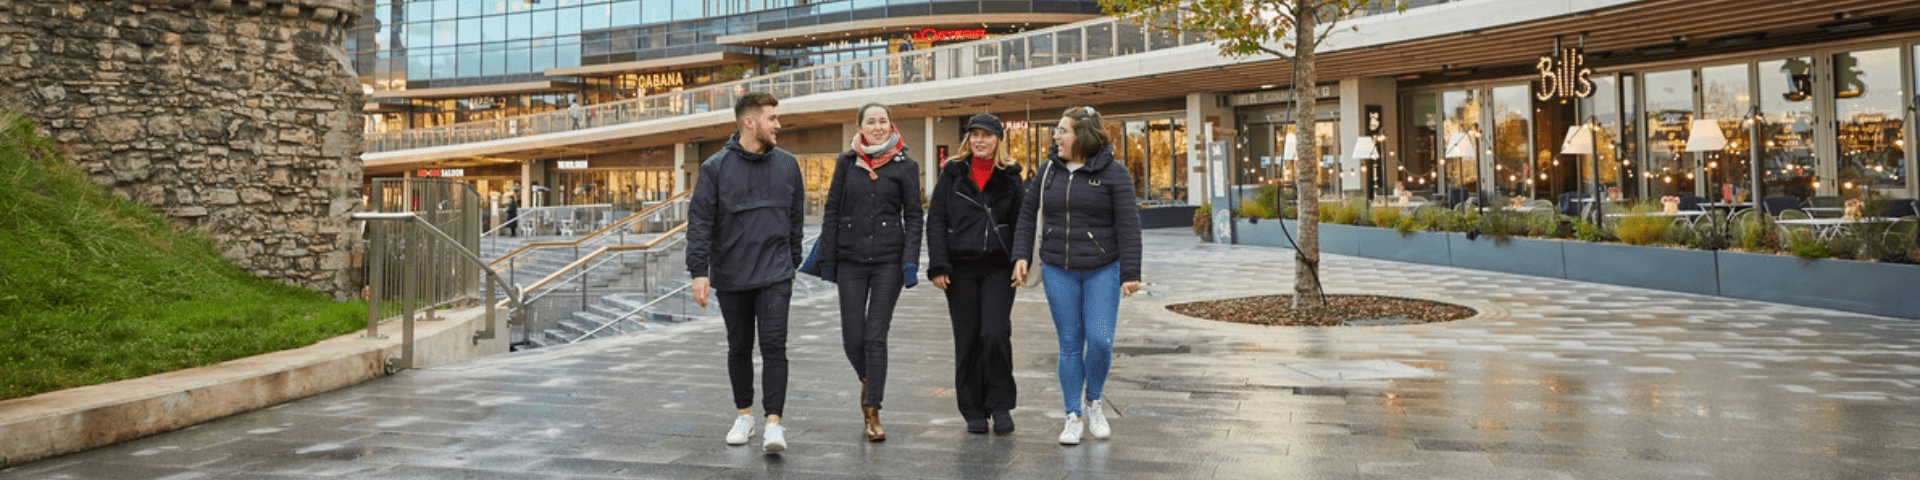 Four students walk past the restaurants in Southampton